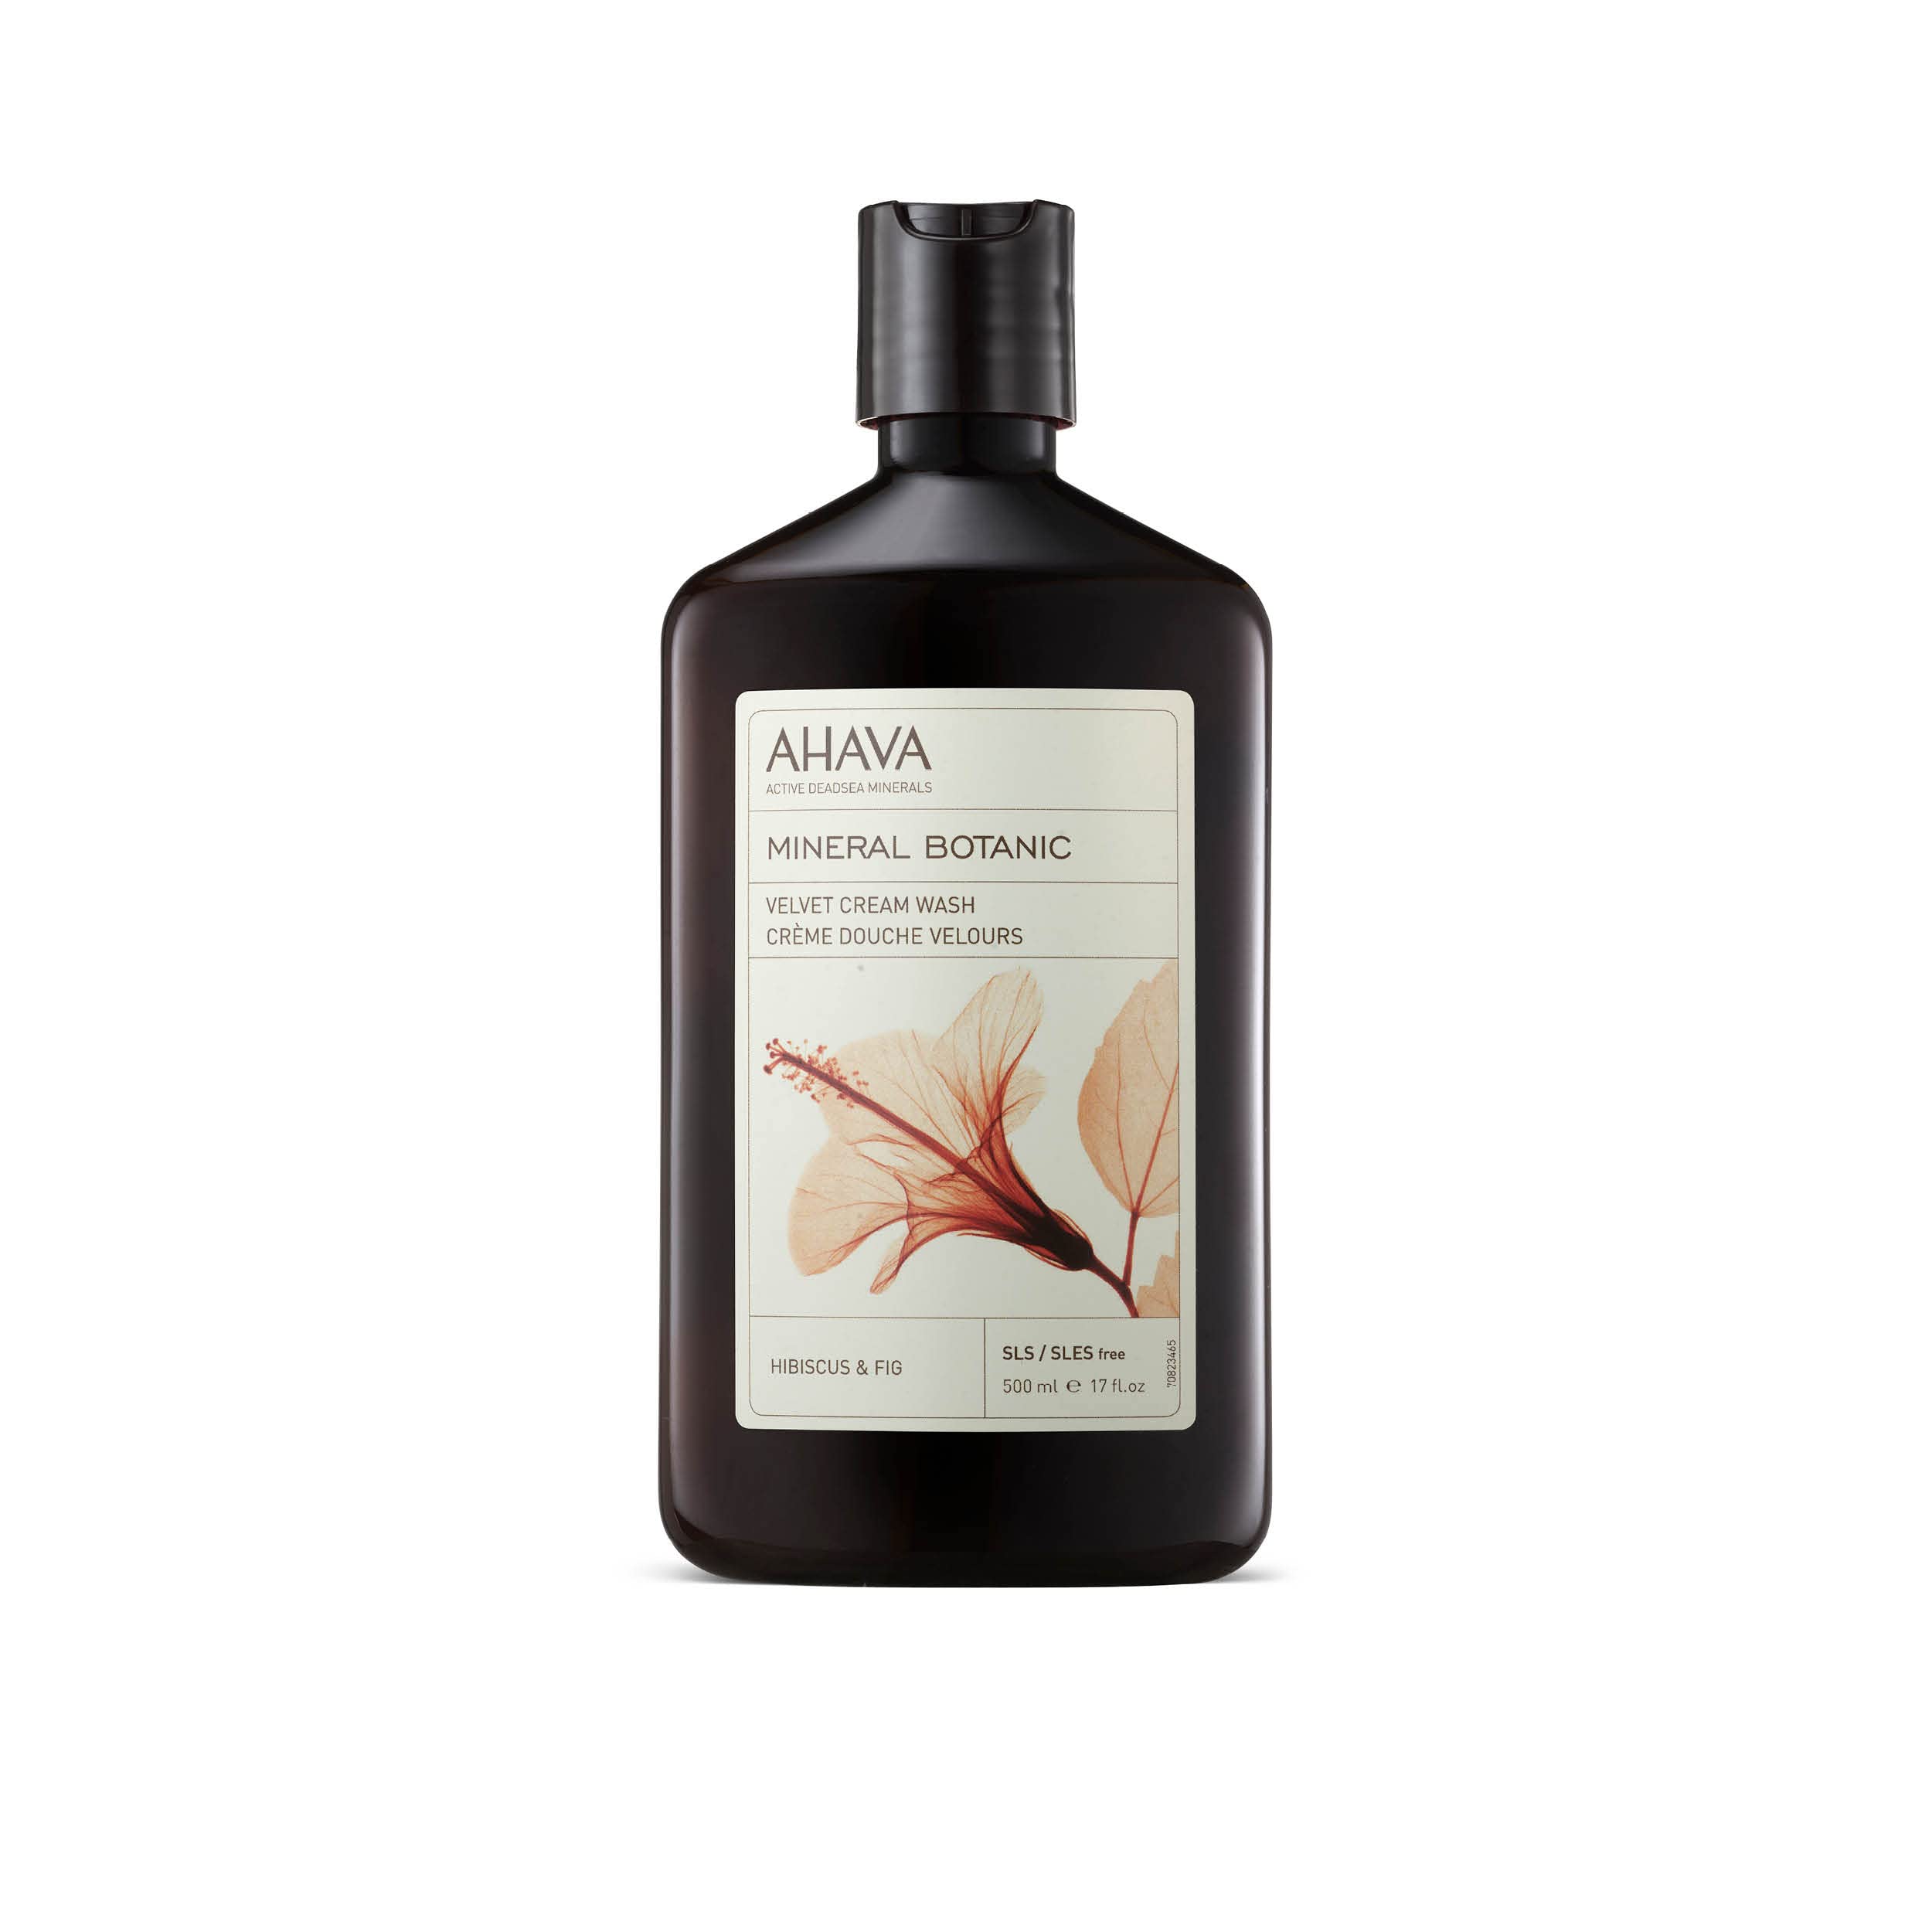 AHAVA Mineral Botanic Velvet Cream Body Wash, Hibiscus & Fig - Washes Away Dirt and Impurities, Relaxes, Enriched with Exfoliating Hibiscus with Malic & Citric Acid, Fig & Exclusive Osmoter, 17 Fl.Oz